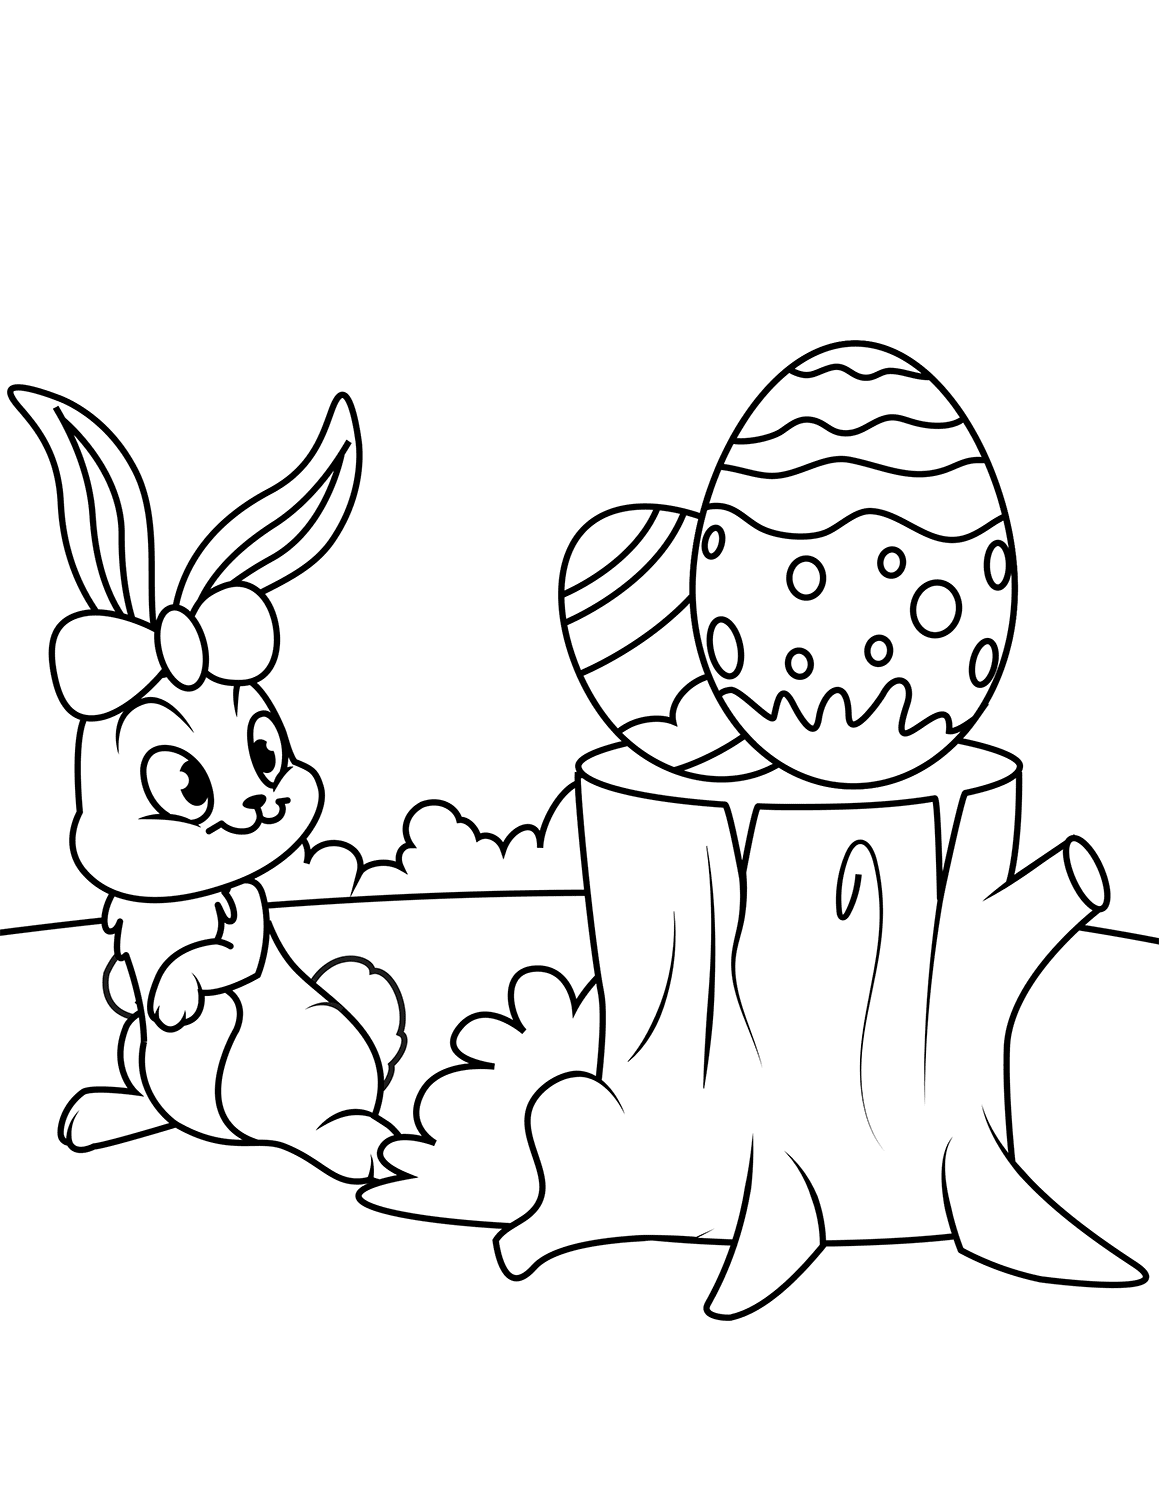 Cute Easter Bunny And Eggs On Hemp Coloring Page